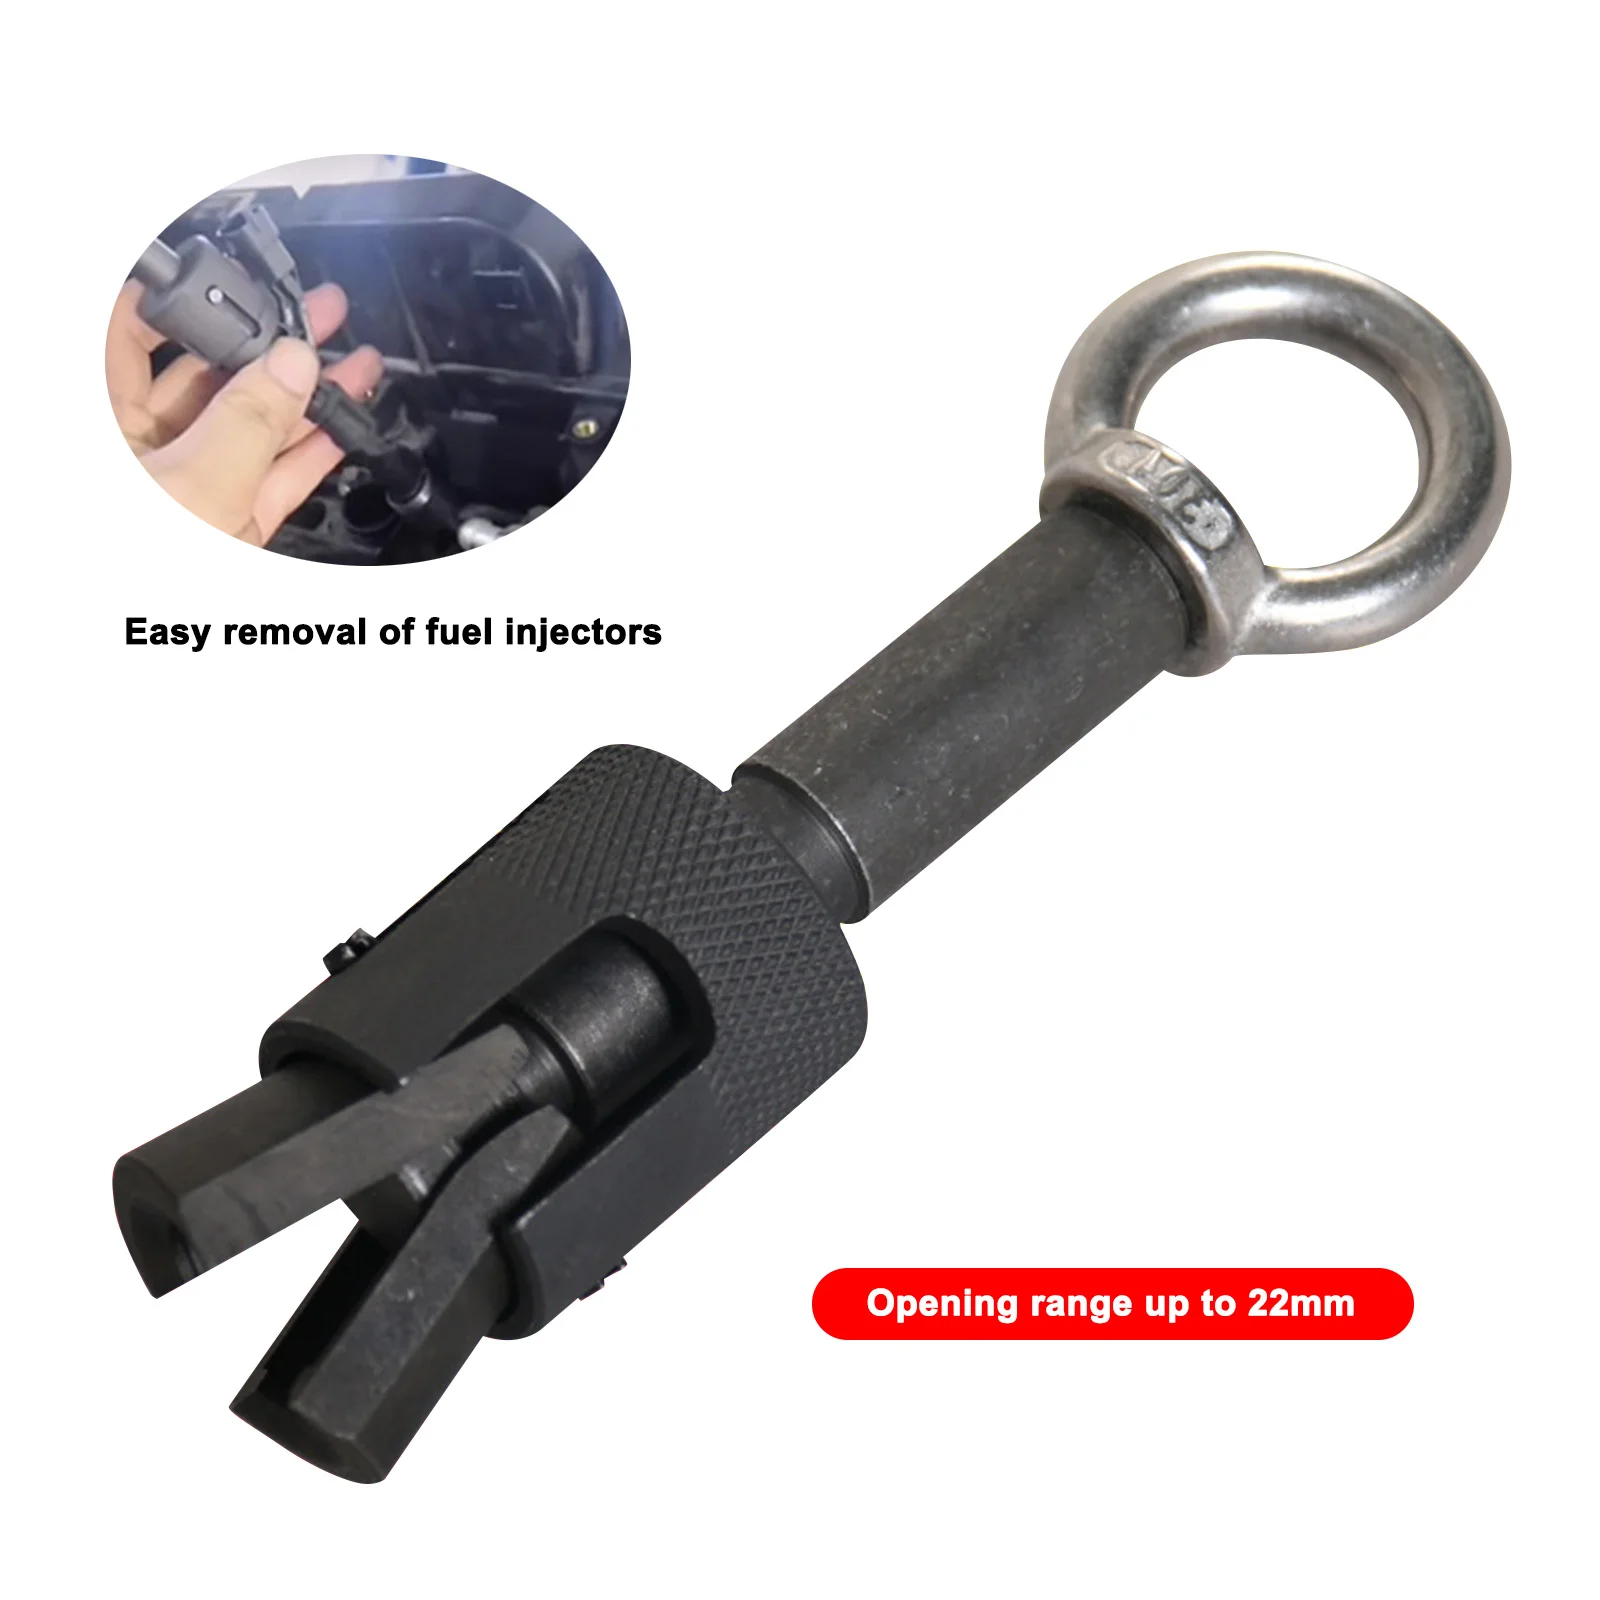 Fuel Injector Remover Installer Puller Tool For Jaguar 3.0 And Land Rover  5.0l 310-197 Engines